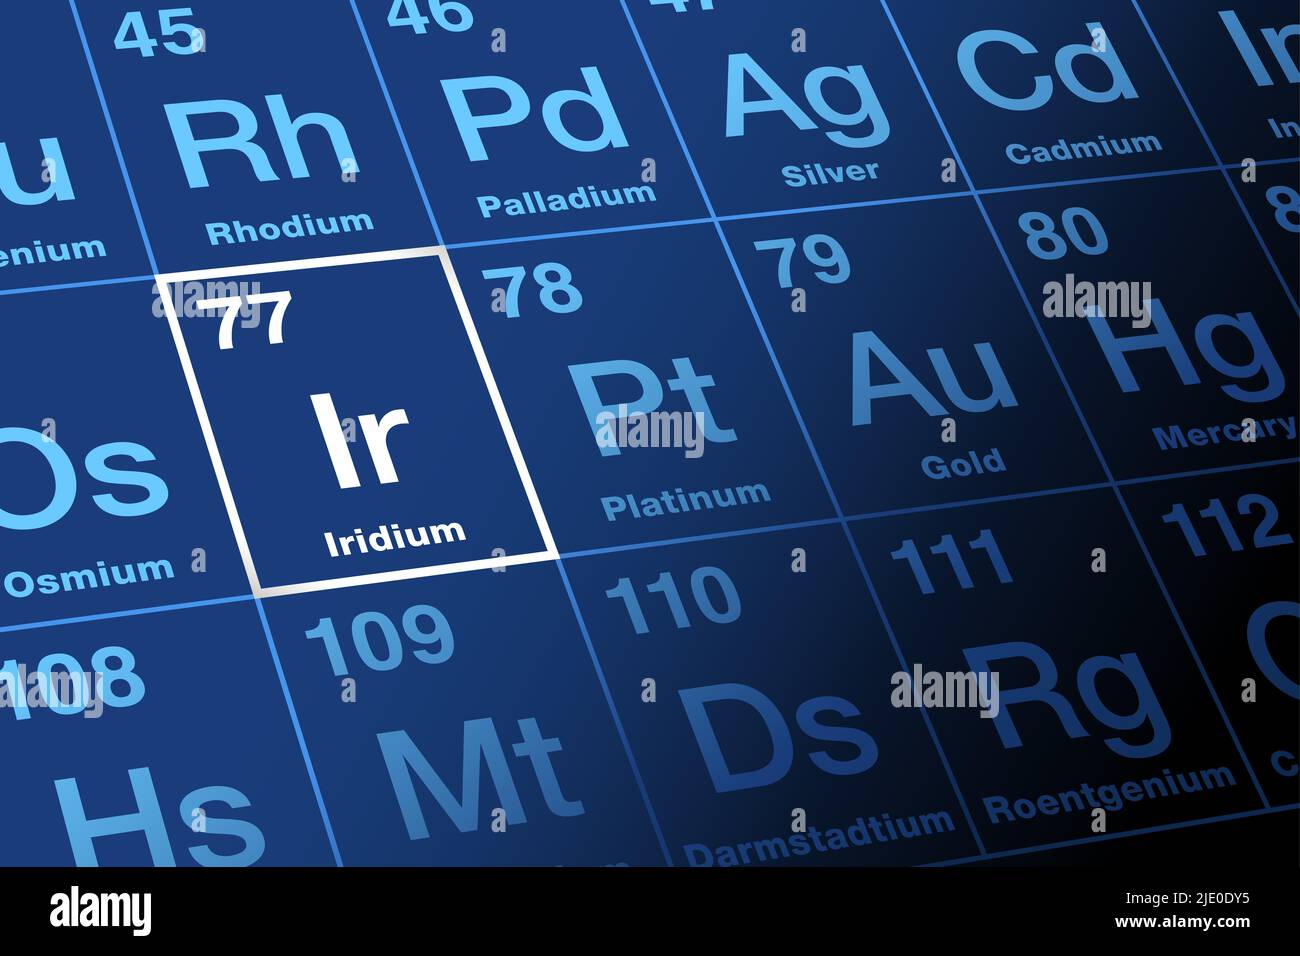 Iridium on periodic table. Chemical element with symbol Ir, named after Greek goddess Iris, and with atomic number 77. Transition metal. Stock Photo